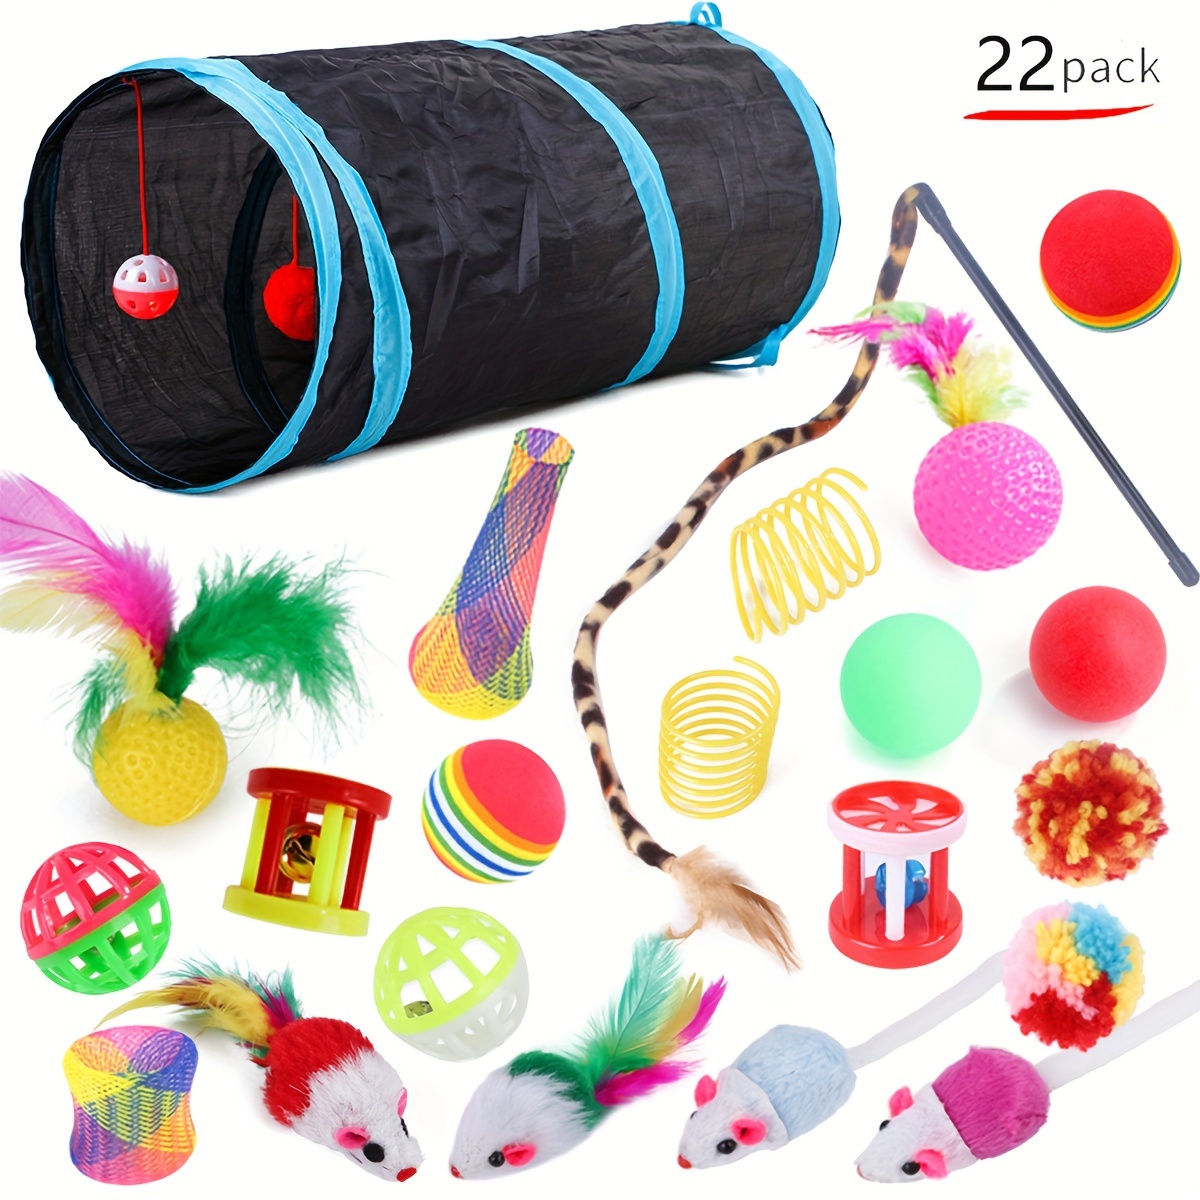 

22pcs Cat Toy Set, Collapsible Tunnel With Bell, Feathers Teaser Wand, Variety Of Mice And Balls, Interactive Play Set For Cats